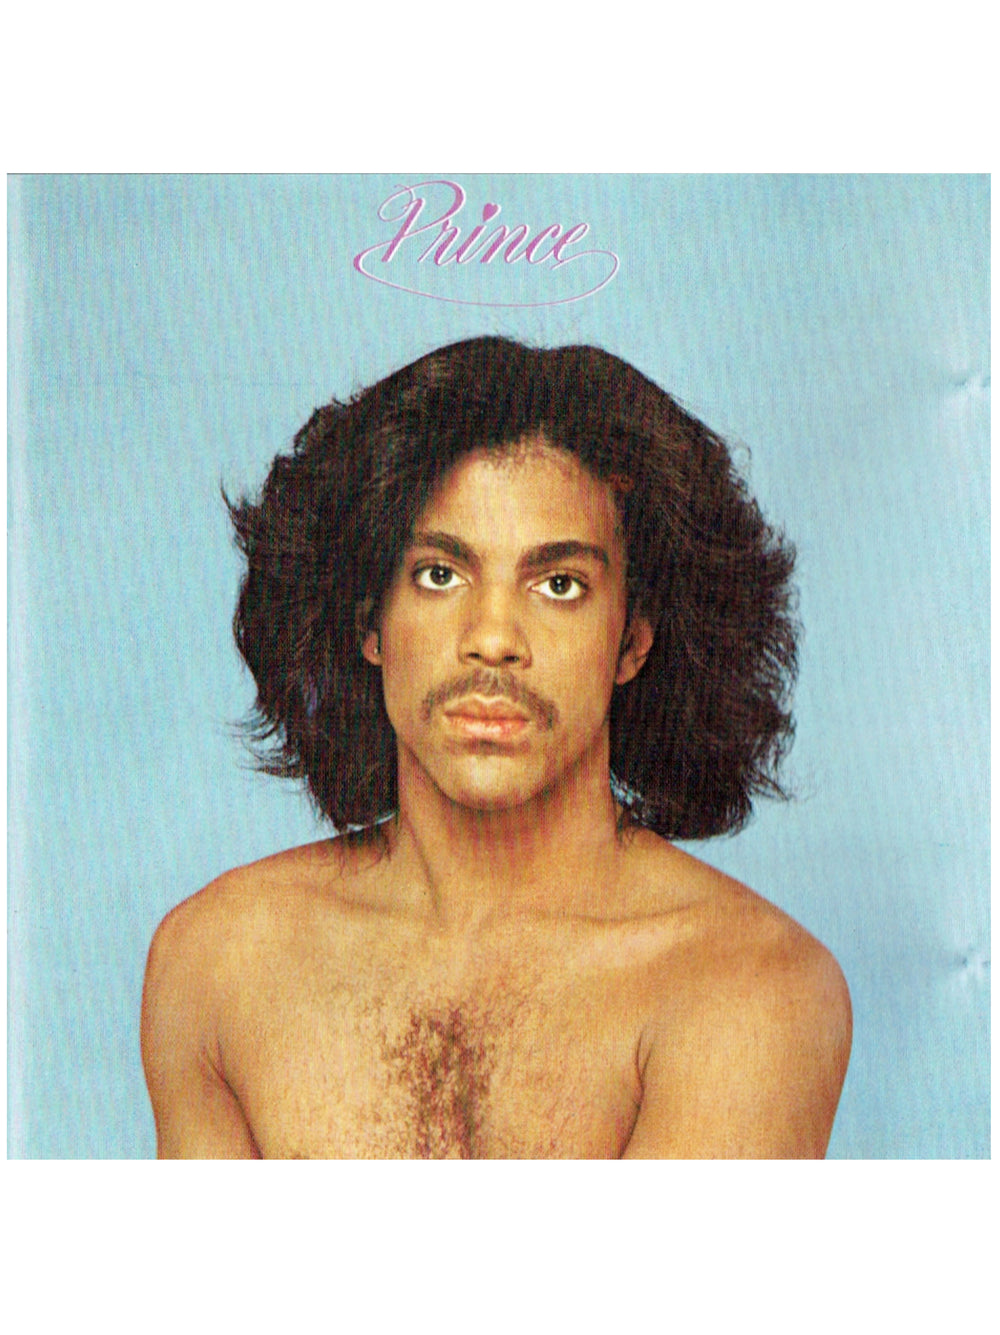 Prince – Prince Self Titled CD Album Reissue Europe Preloved: 1987